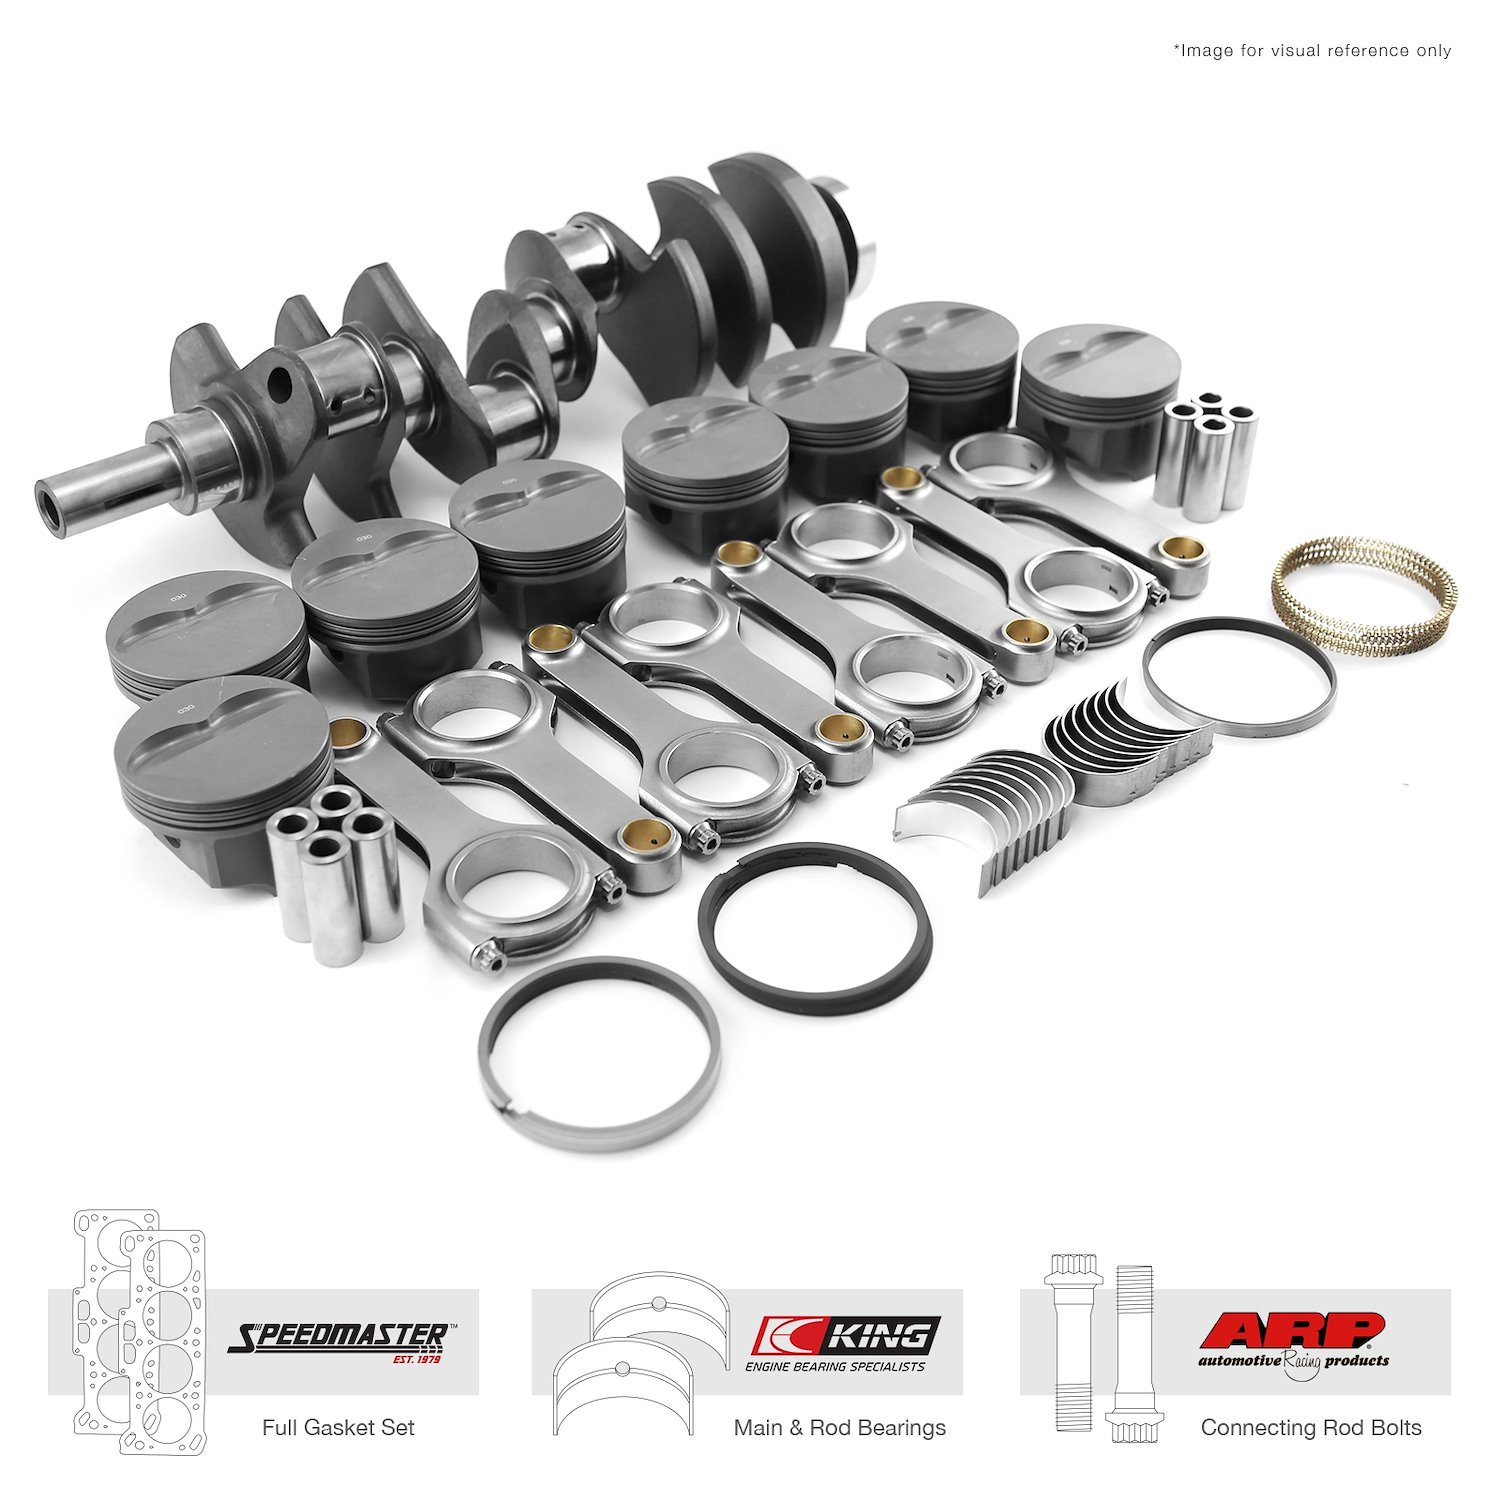 1-290-011 Ford 351W Windsor 3.850 in. 393 ci Rotating Assembly Kit - Sportsman Series